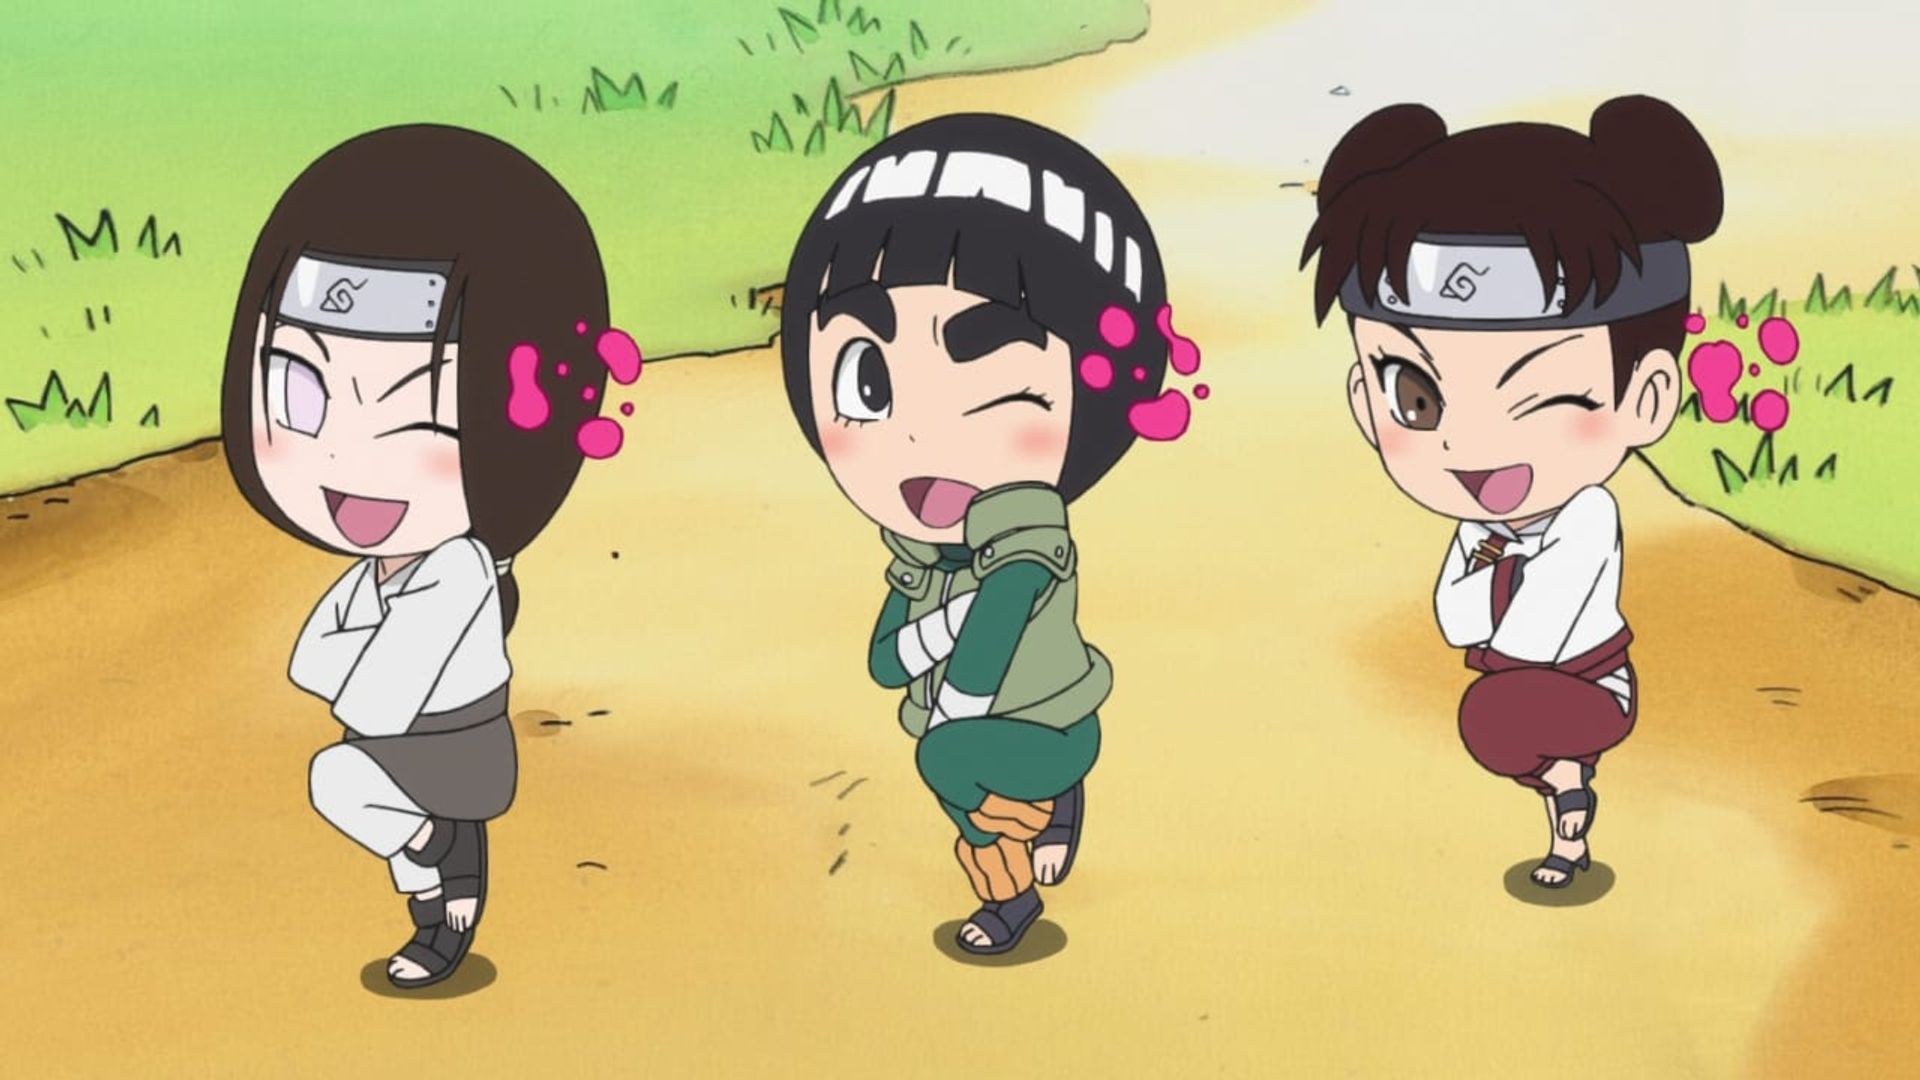 10 of the best Chibi anime series you should check out - Rock Lee and his ninja pals again